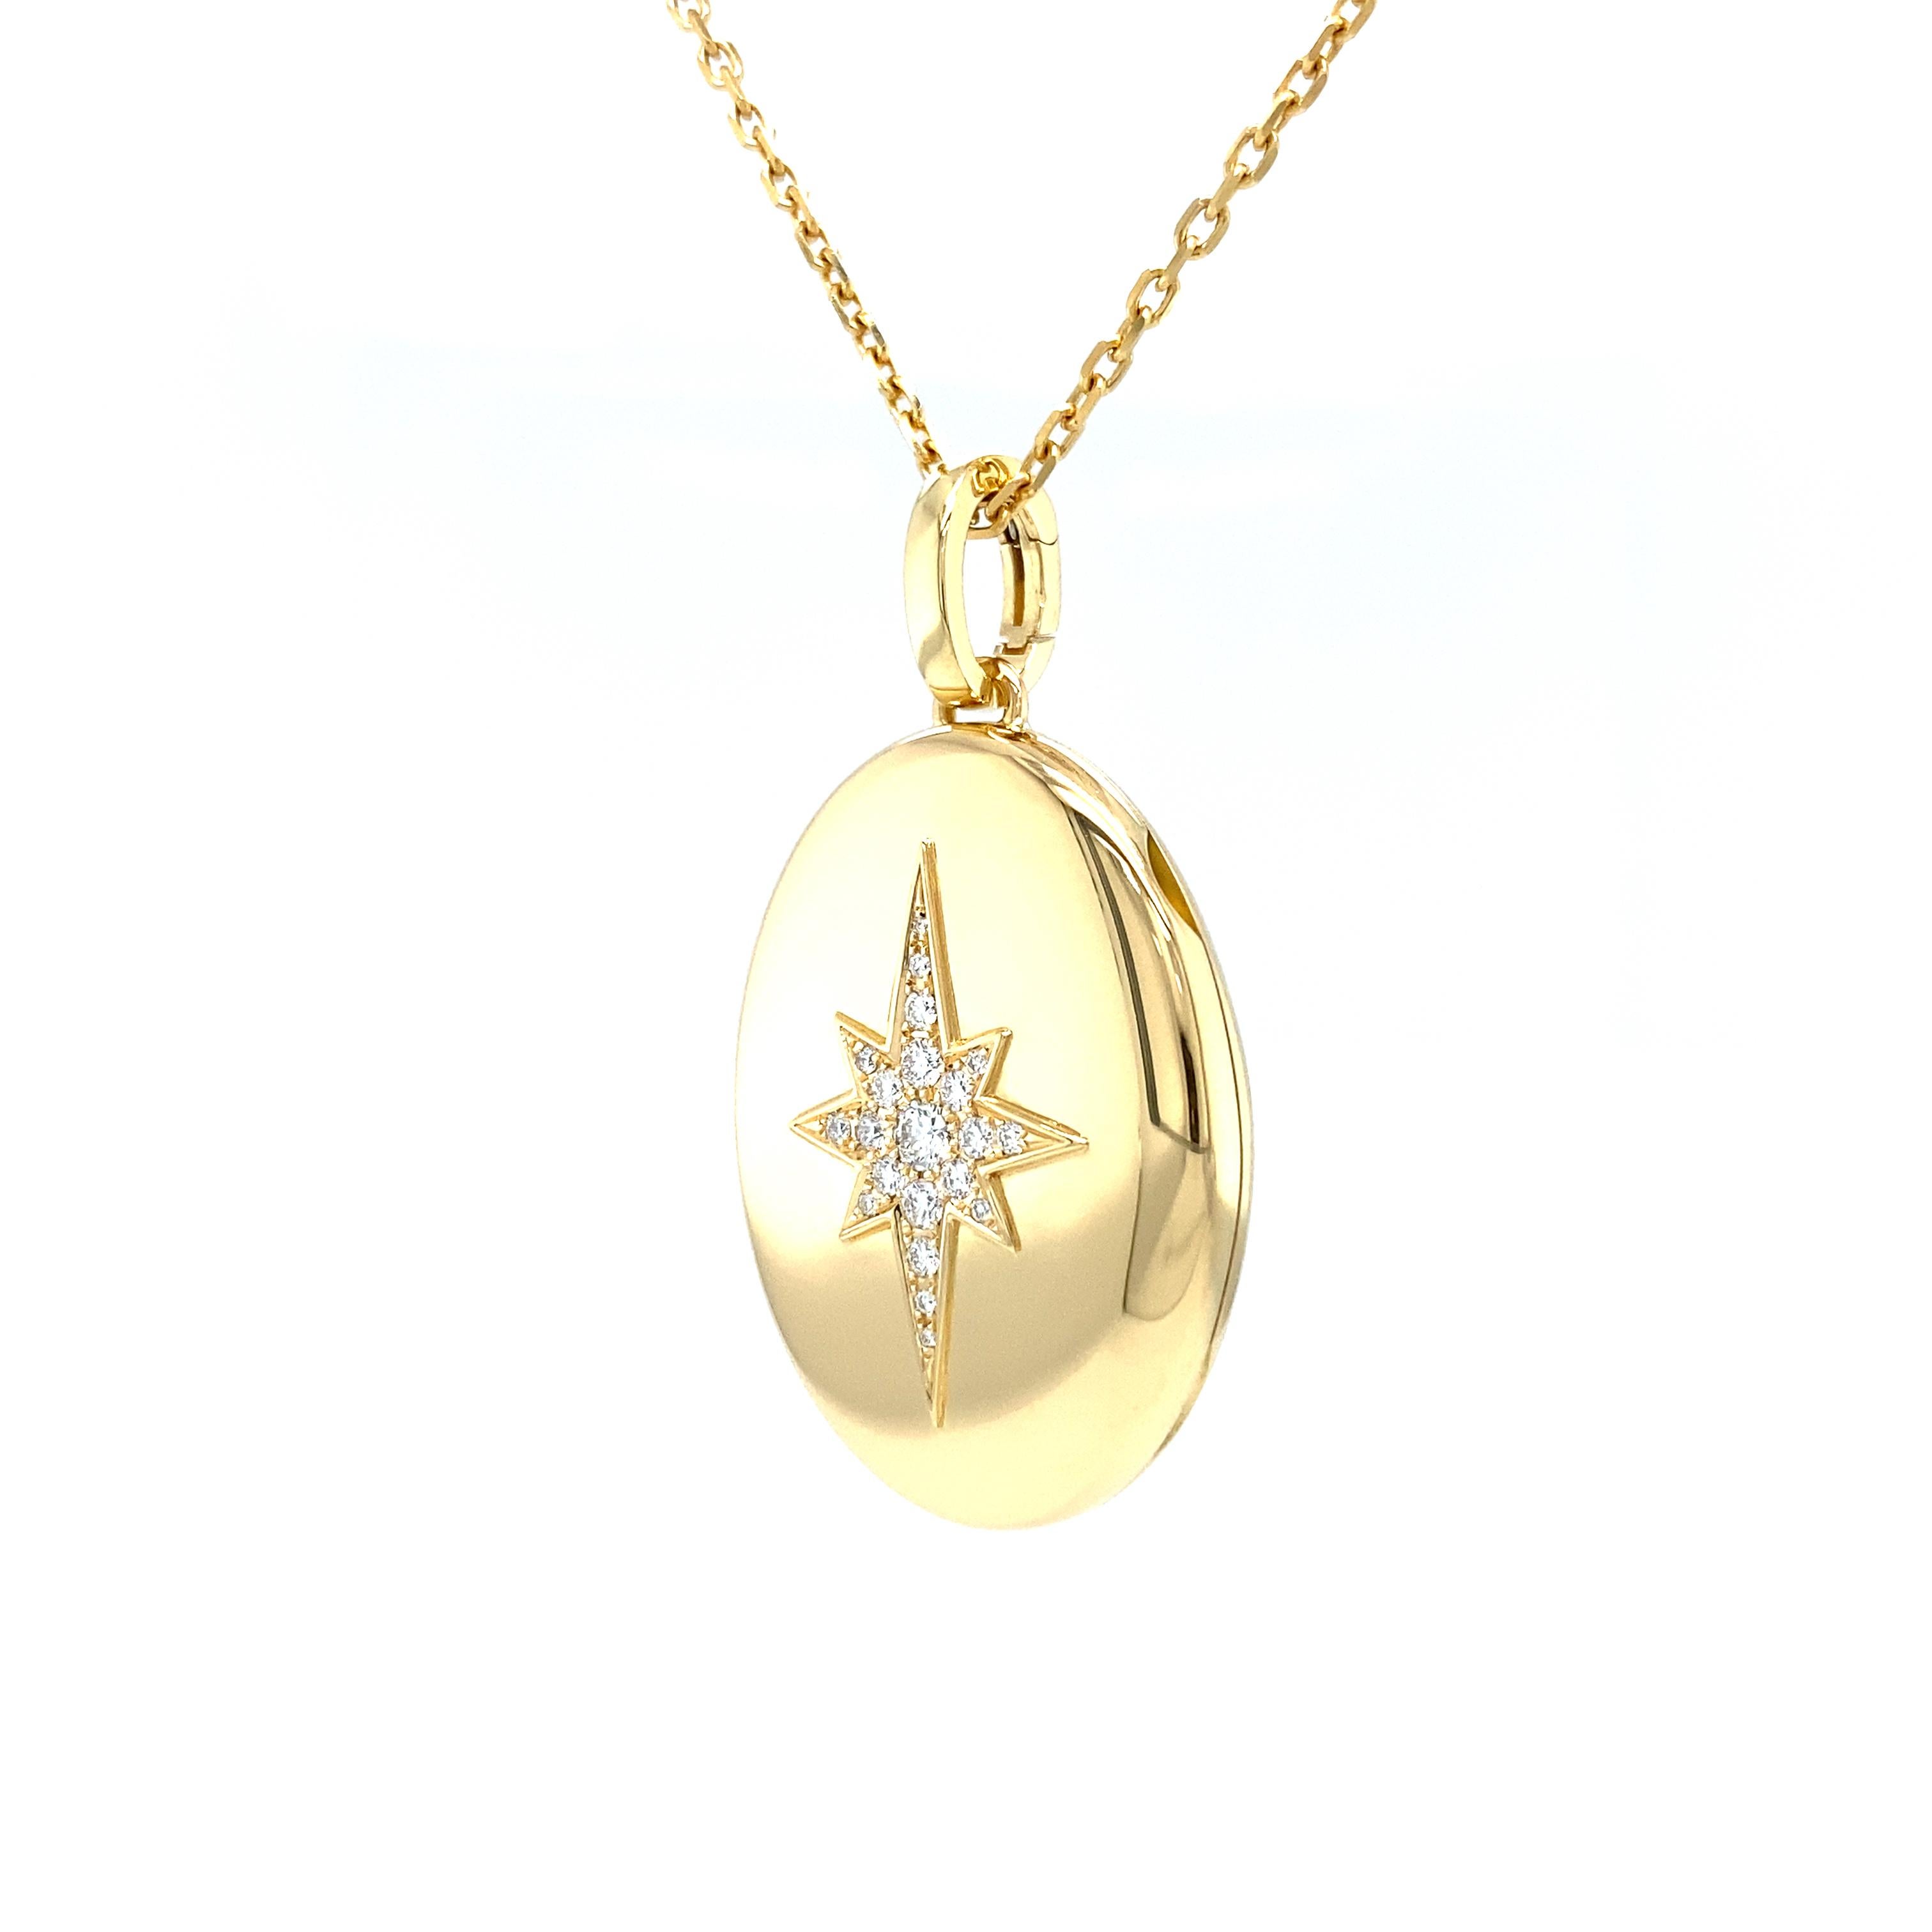 Brilliant Cut Oval Polished Locket Pendant Necklace - 18k Yellow Gold - 9 Diamonds 0.14ct G VS For Sale